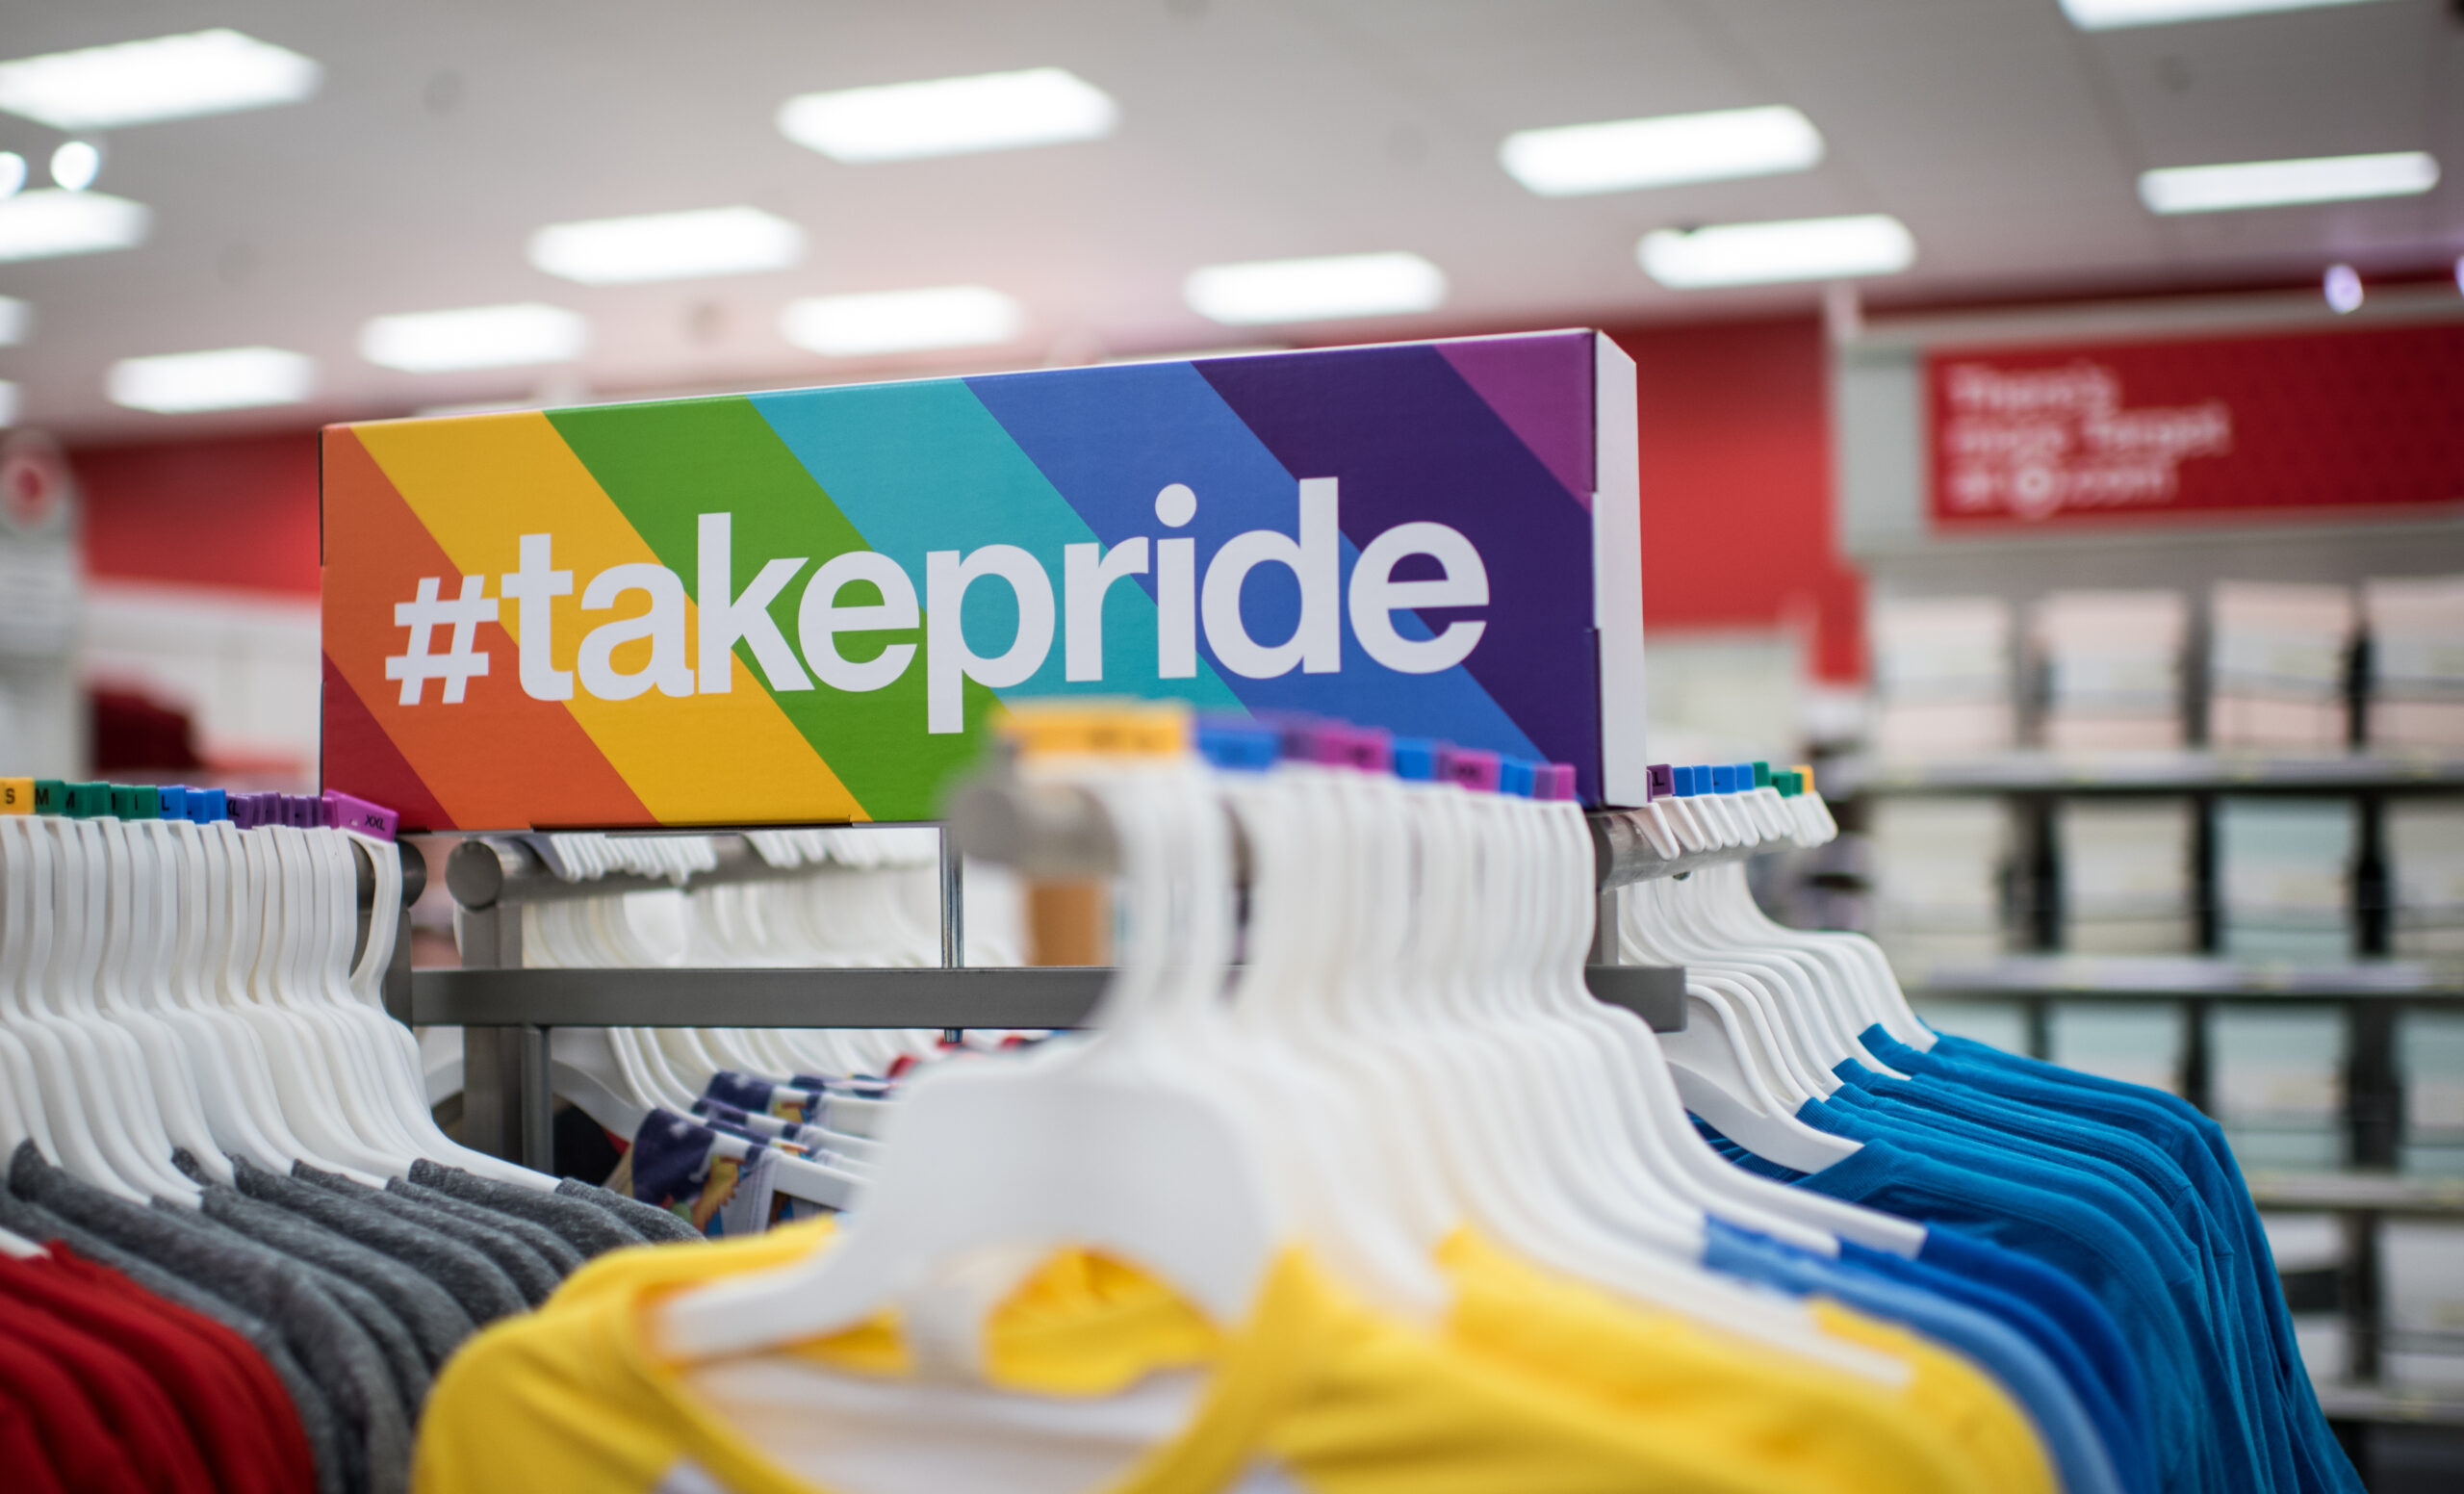 Chest Binders And Packing Underwear Featured In Target's New Pride